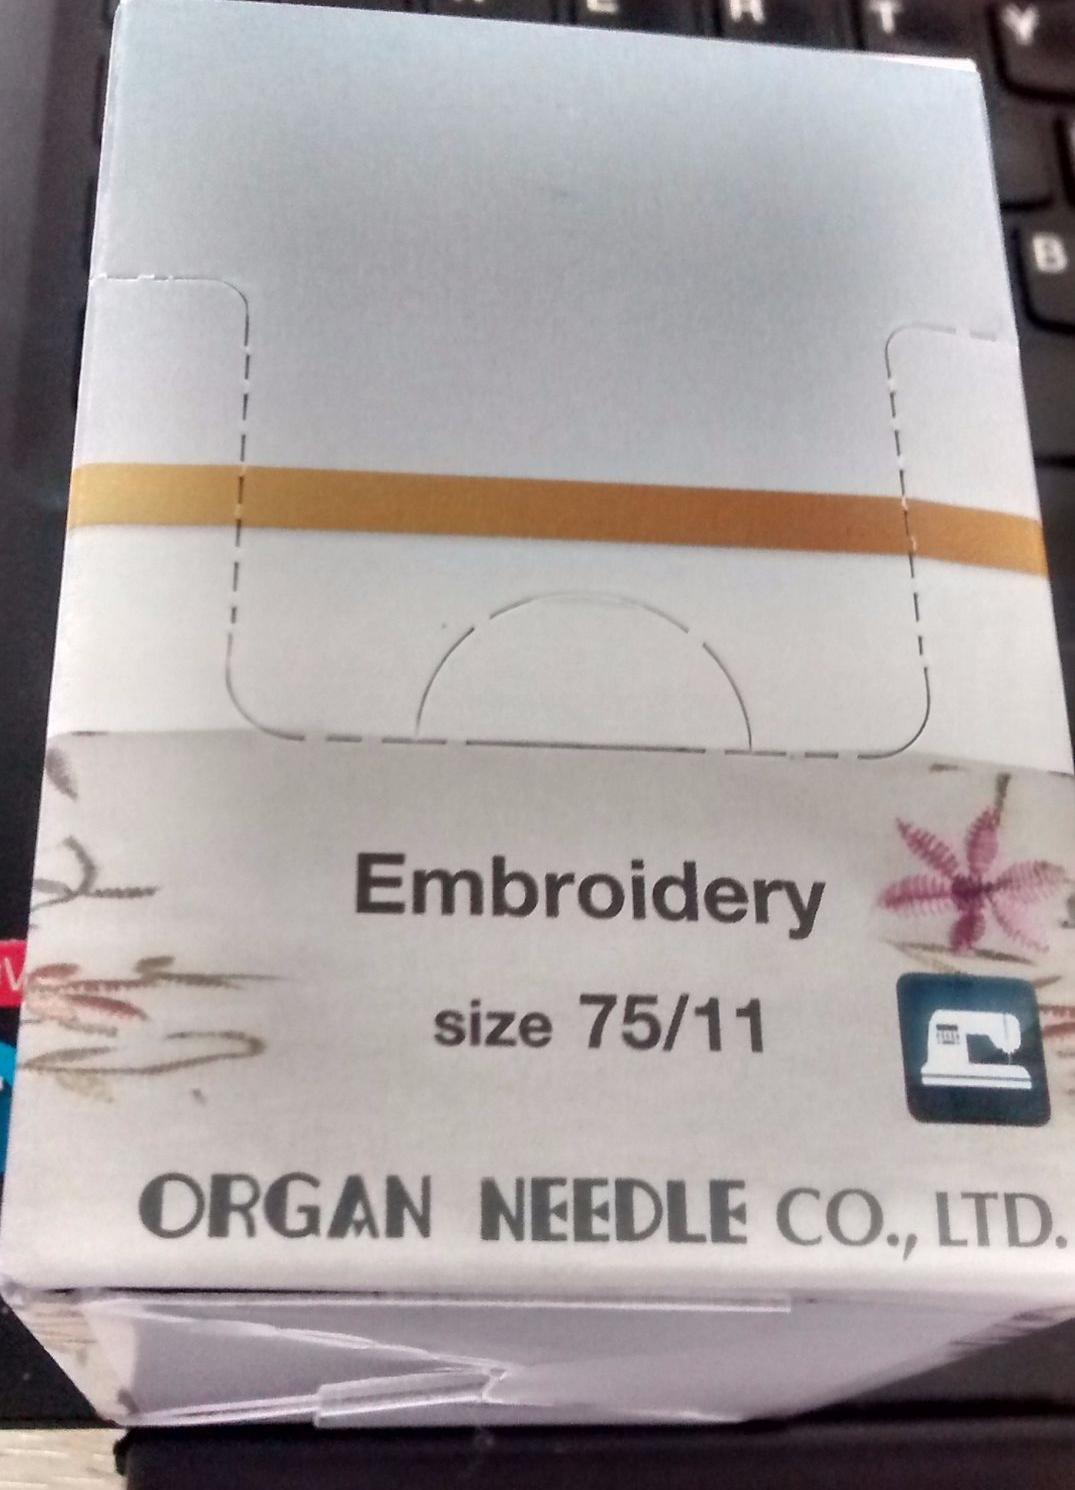  RED TOP ORGAN EMBROIDERY NEEDLES 75/11 - 100 NEEDLES (FLAT BACK)